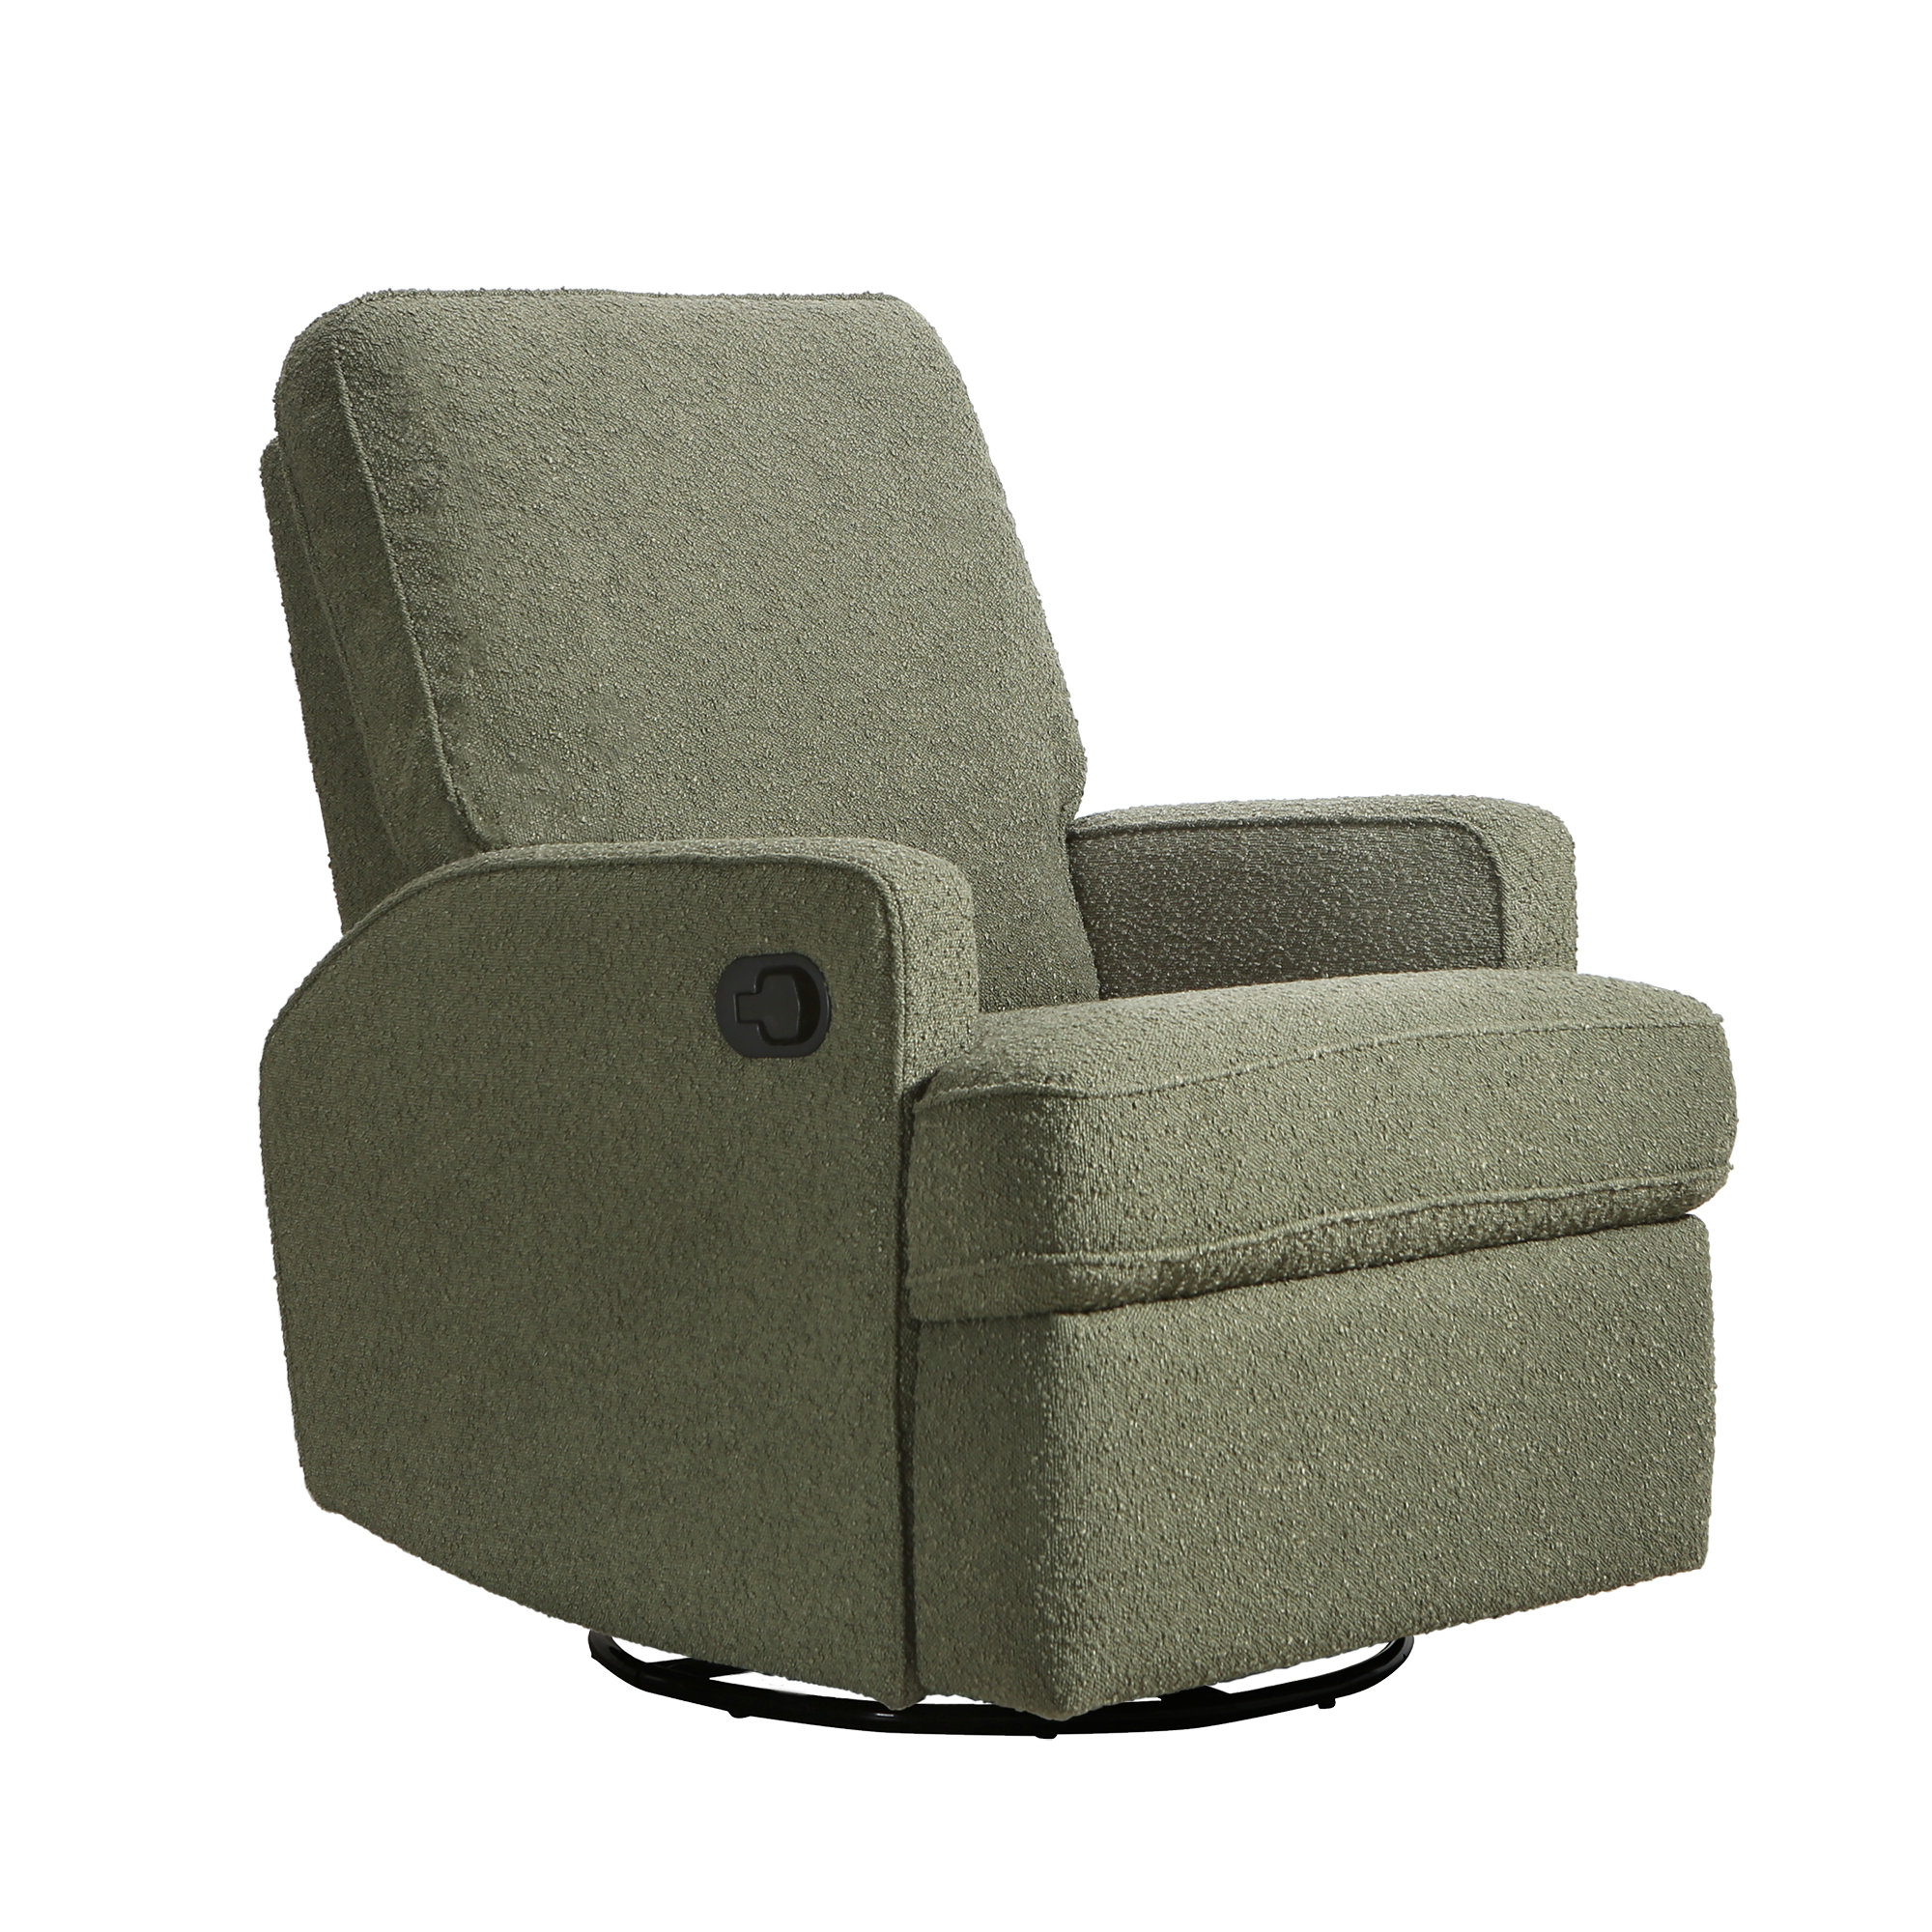 Novelia Beige Polyester Fabric Swivel Chair - Rooms To Go